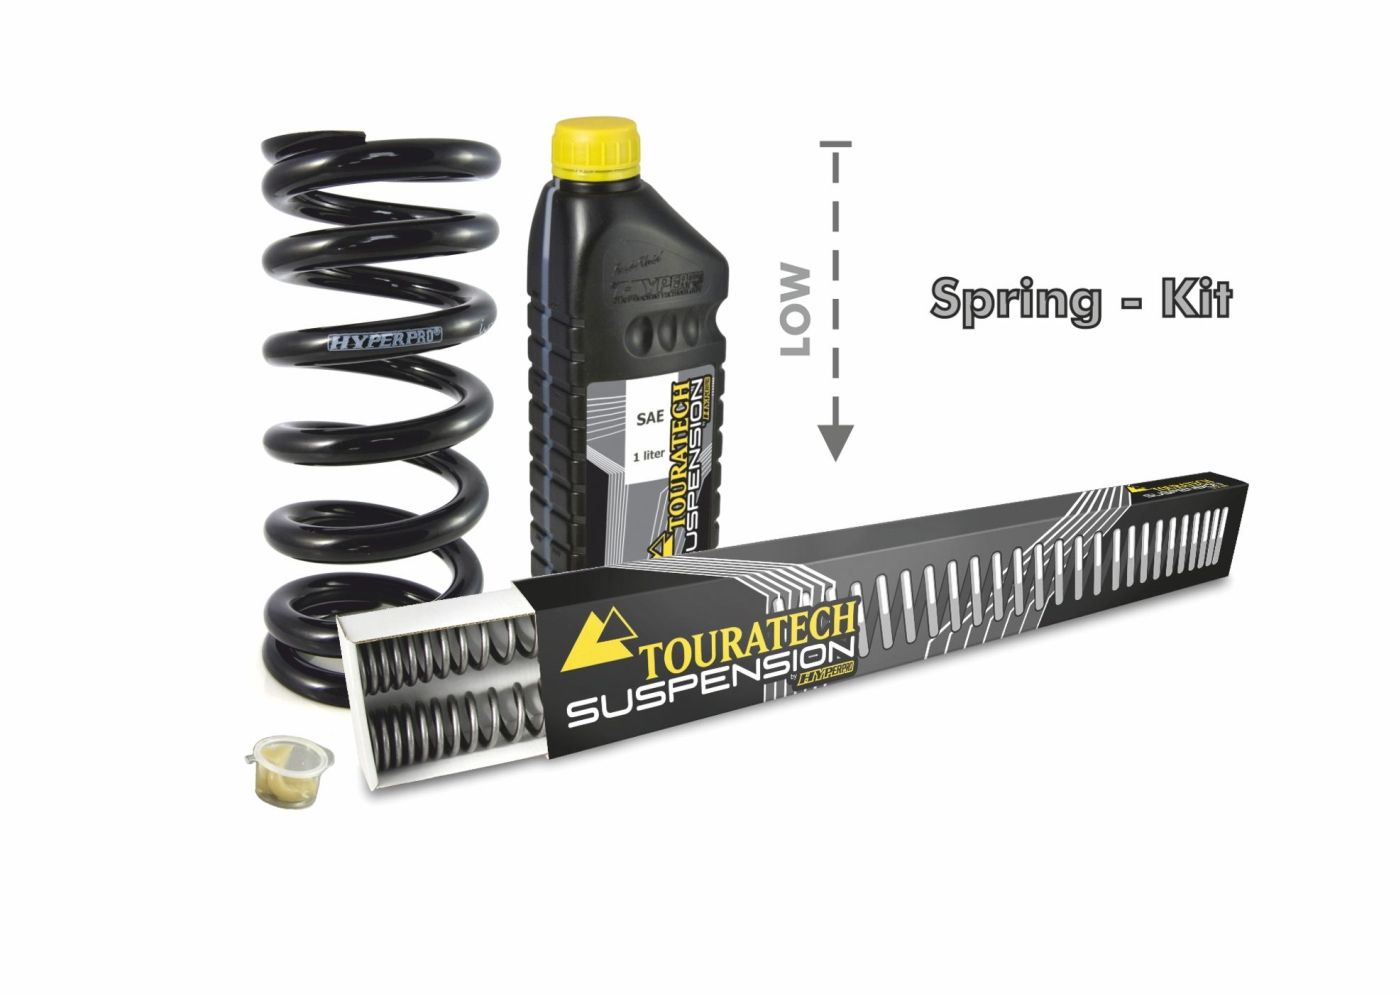 Touratech Suspension lowering kit -25mm for Kawasaki Z 1000 SX (NINJA 1000)  (ABS) 2017 2020 Touratech: Online shop for motorbike accessories